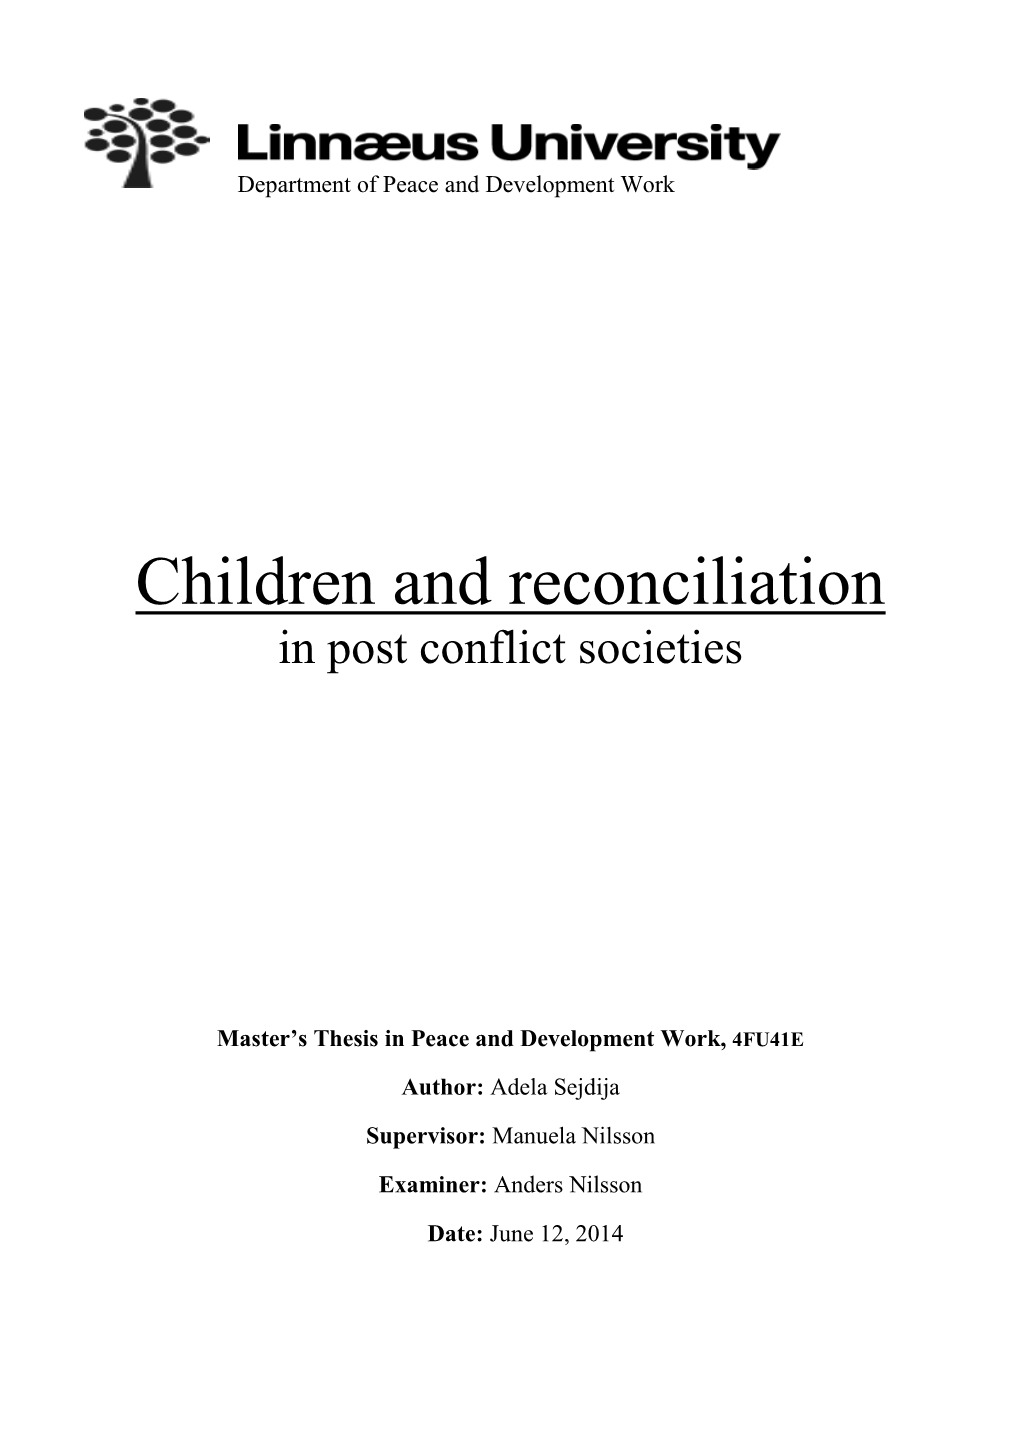 Children and Reconciliation in Post Conflict Societies